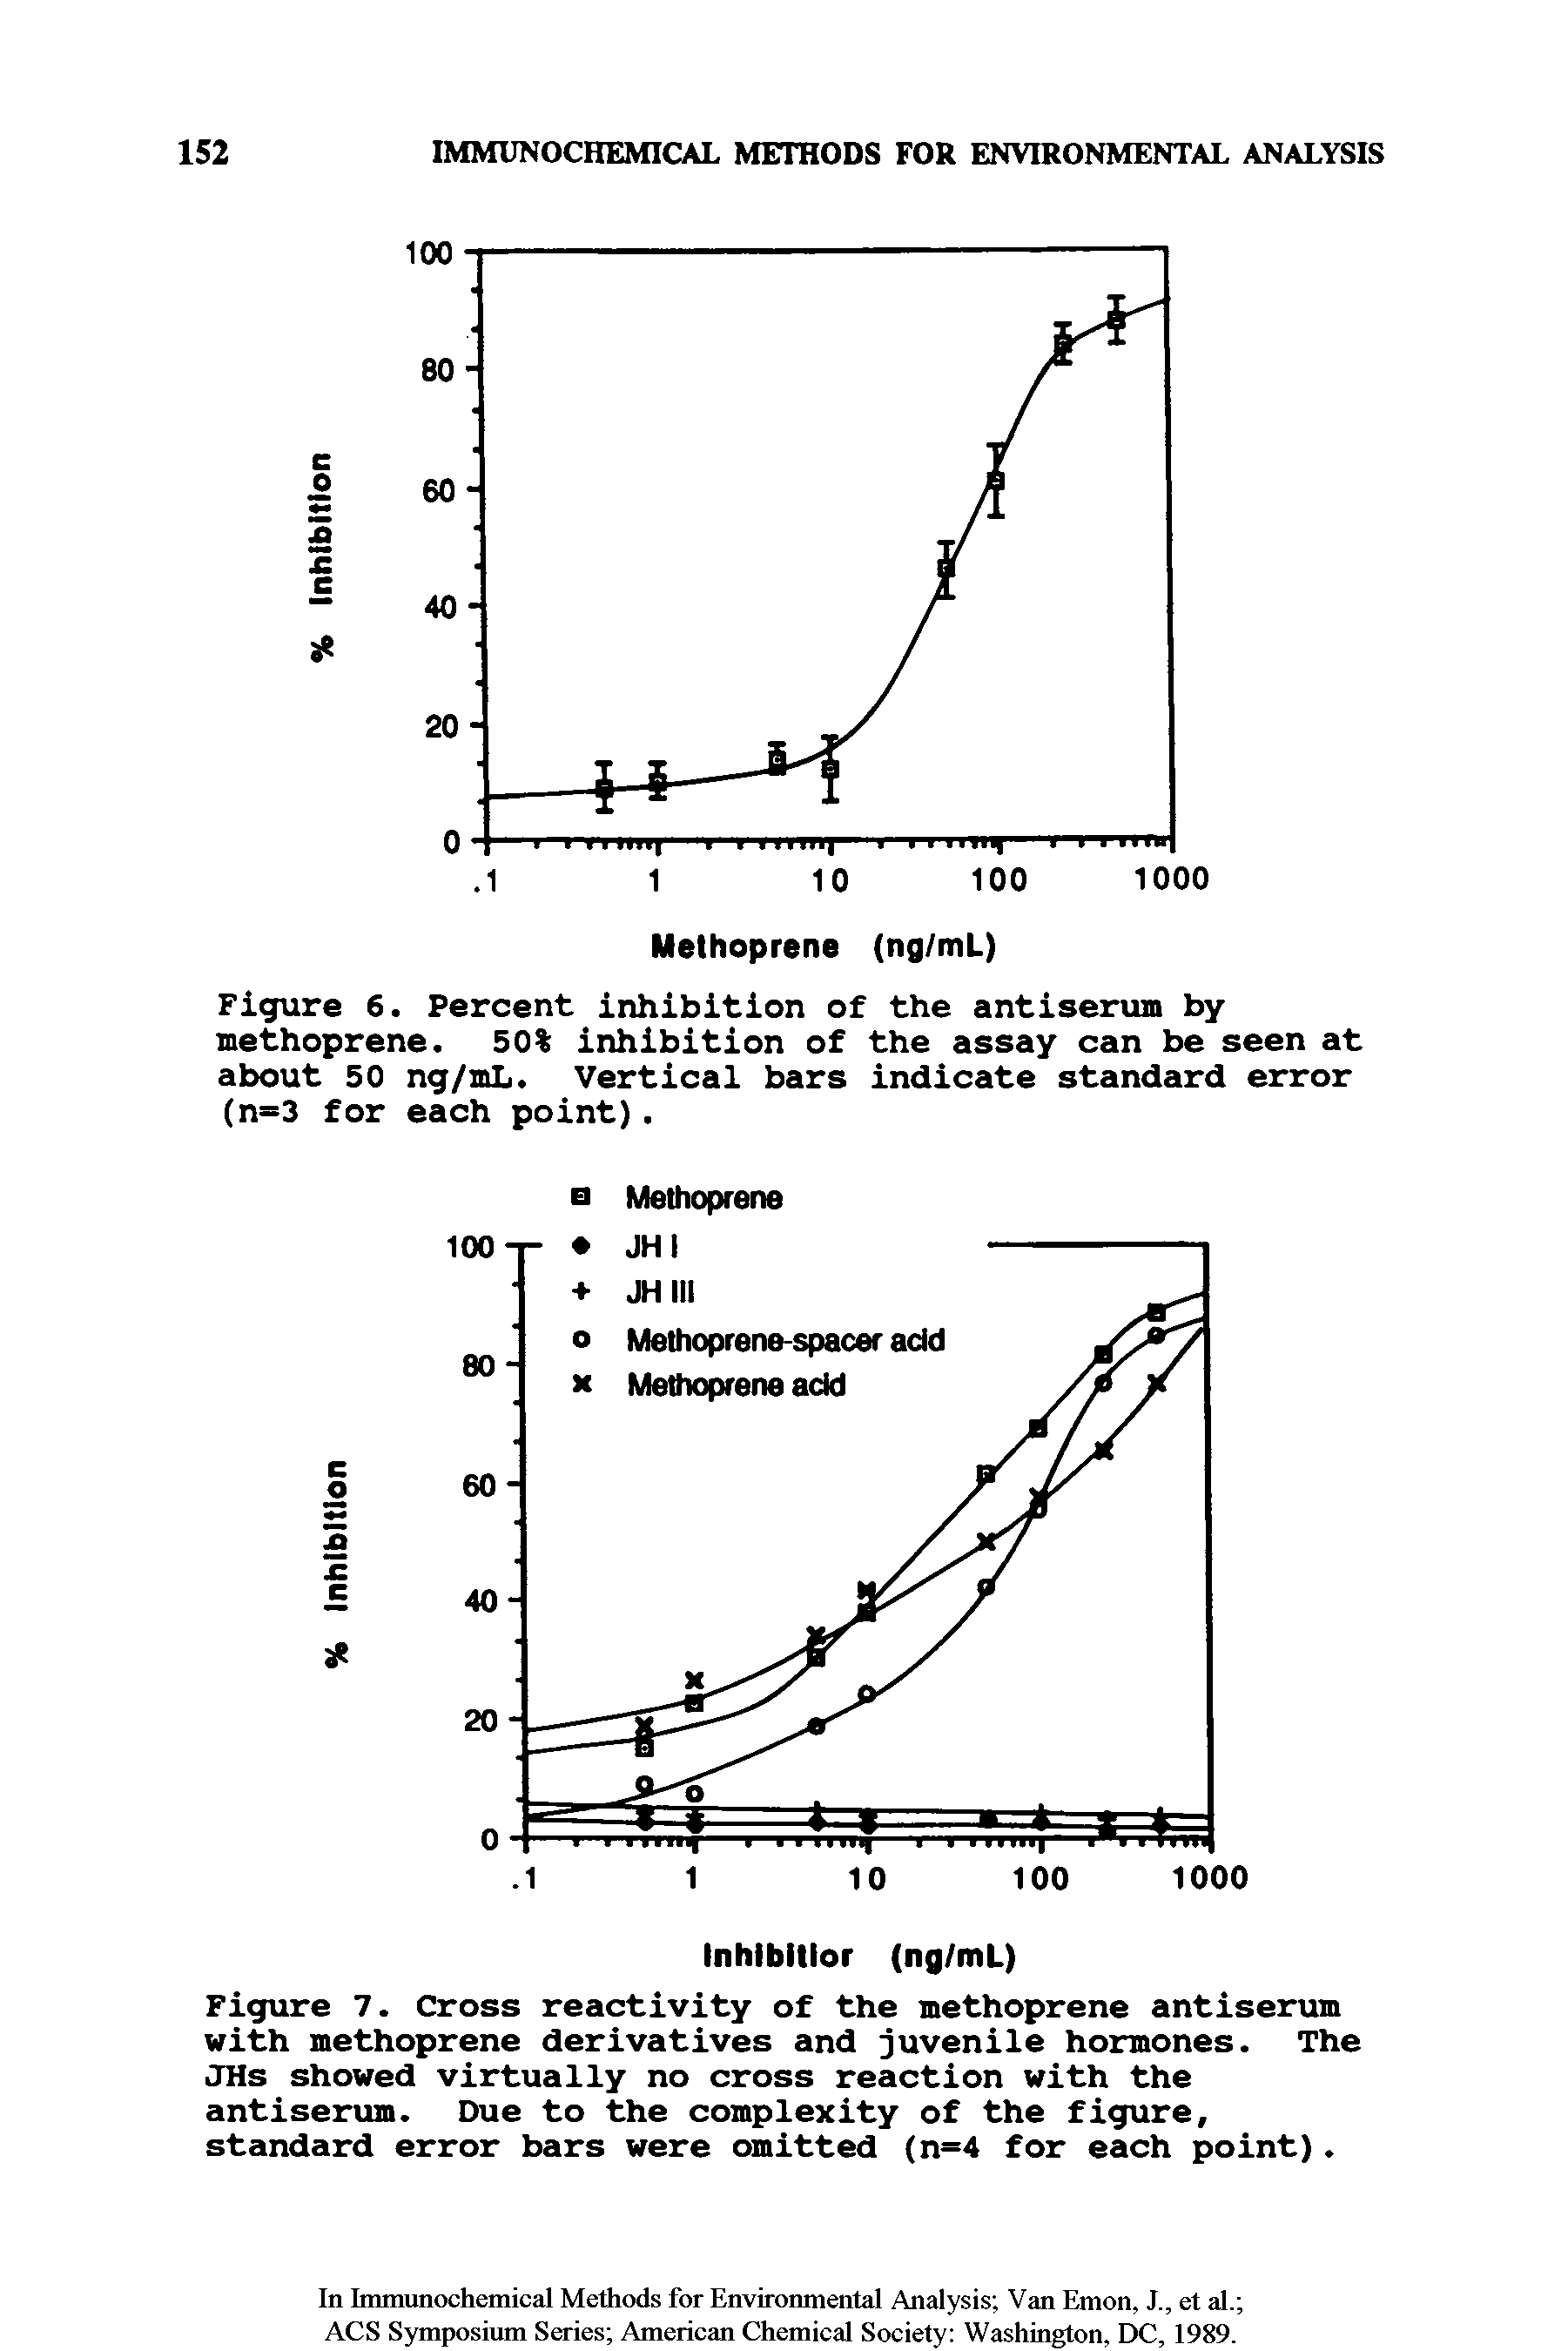 Figure 7. Cross reactivity of the methoprene antiserum with methoprene derivatives and juvenile hormones. The JHs showed virtually no cross reaction with the antiserum. Due to the complexity of the figure, standard error bars were omitted (n=4 for each point).